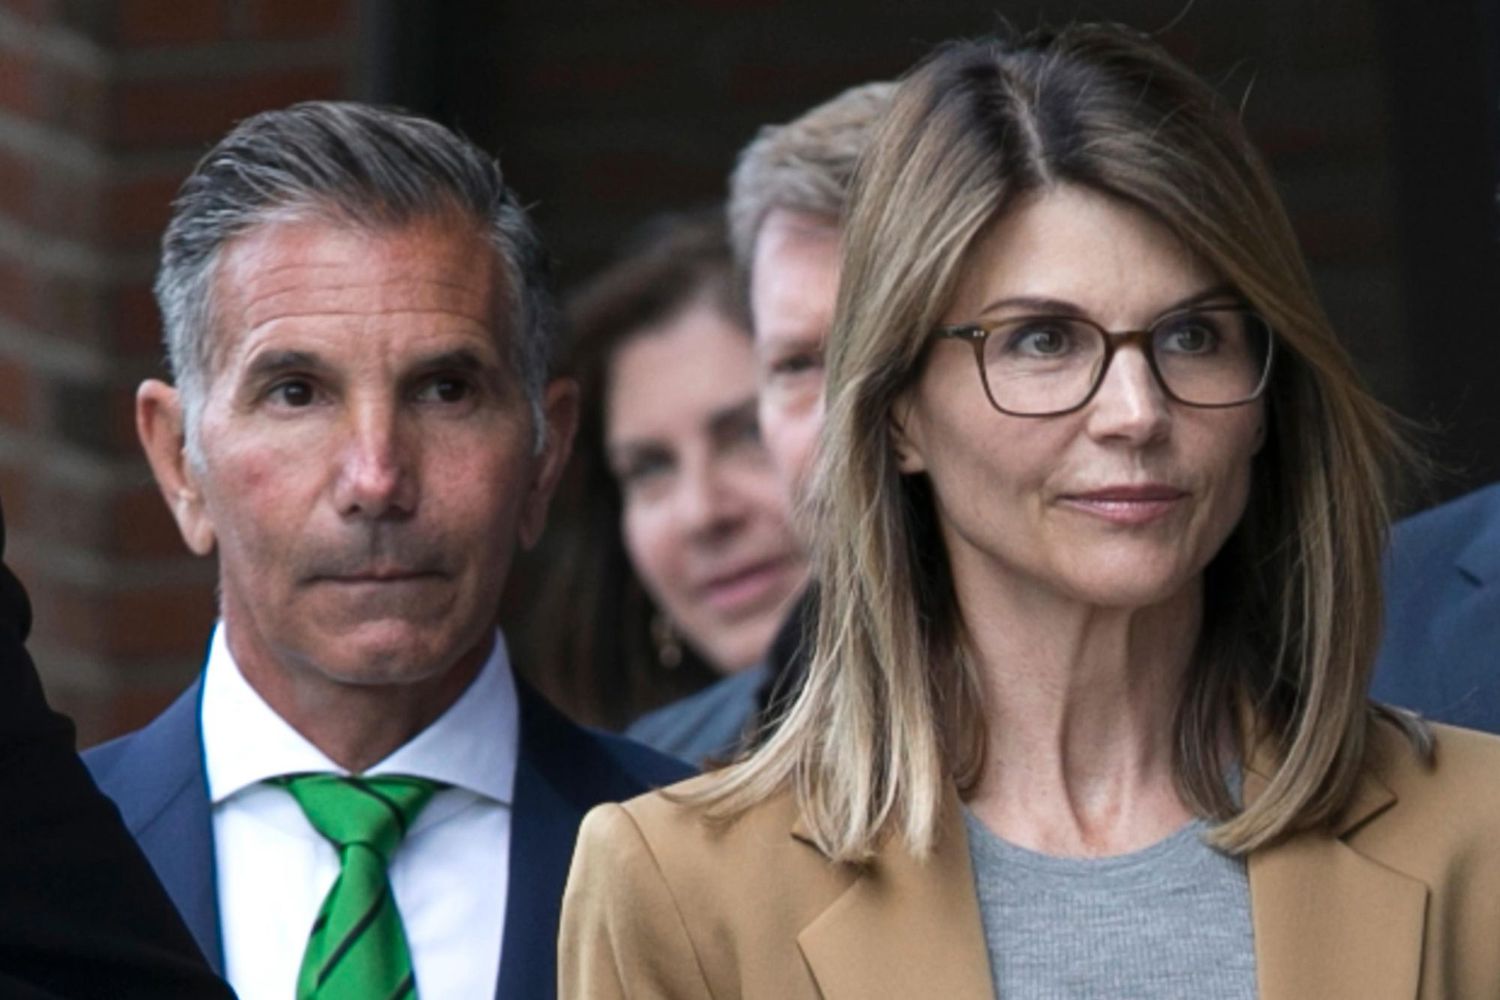 Lori Loughlin facing charges in a nationwide college admissions cheating scheme, Boston, USA - 03 Apr 2019